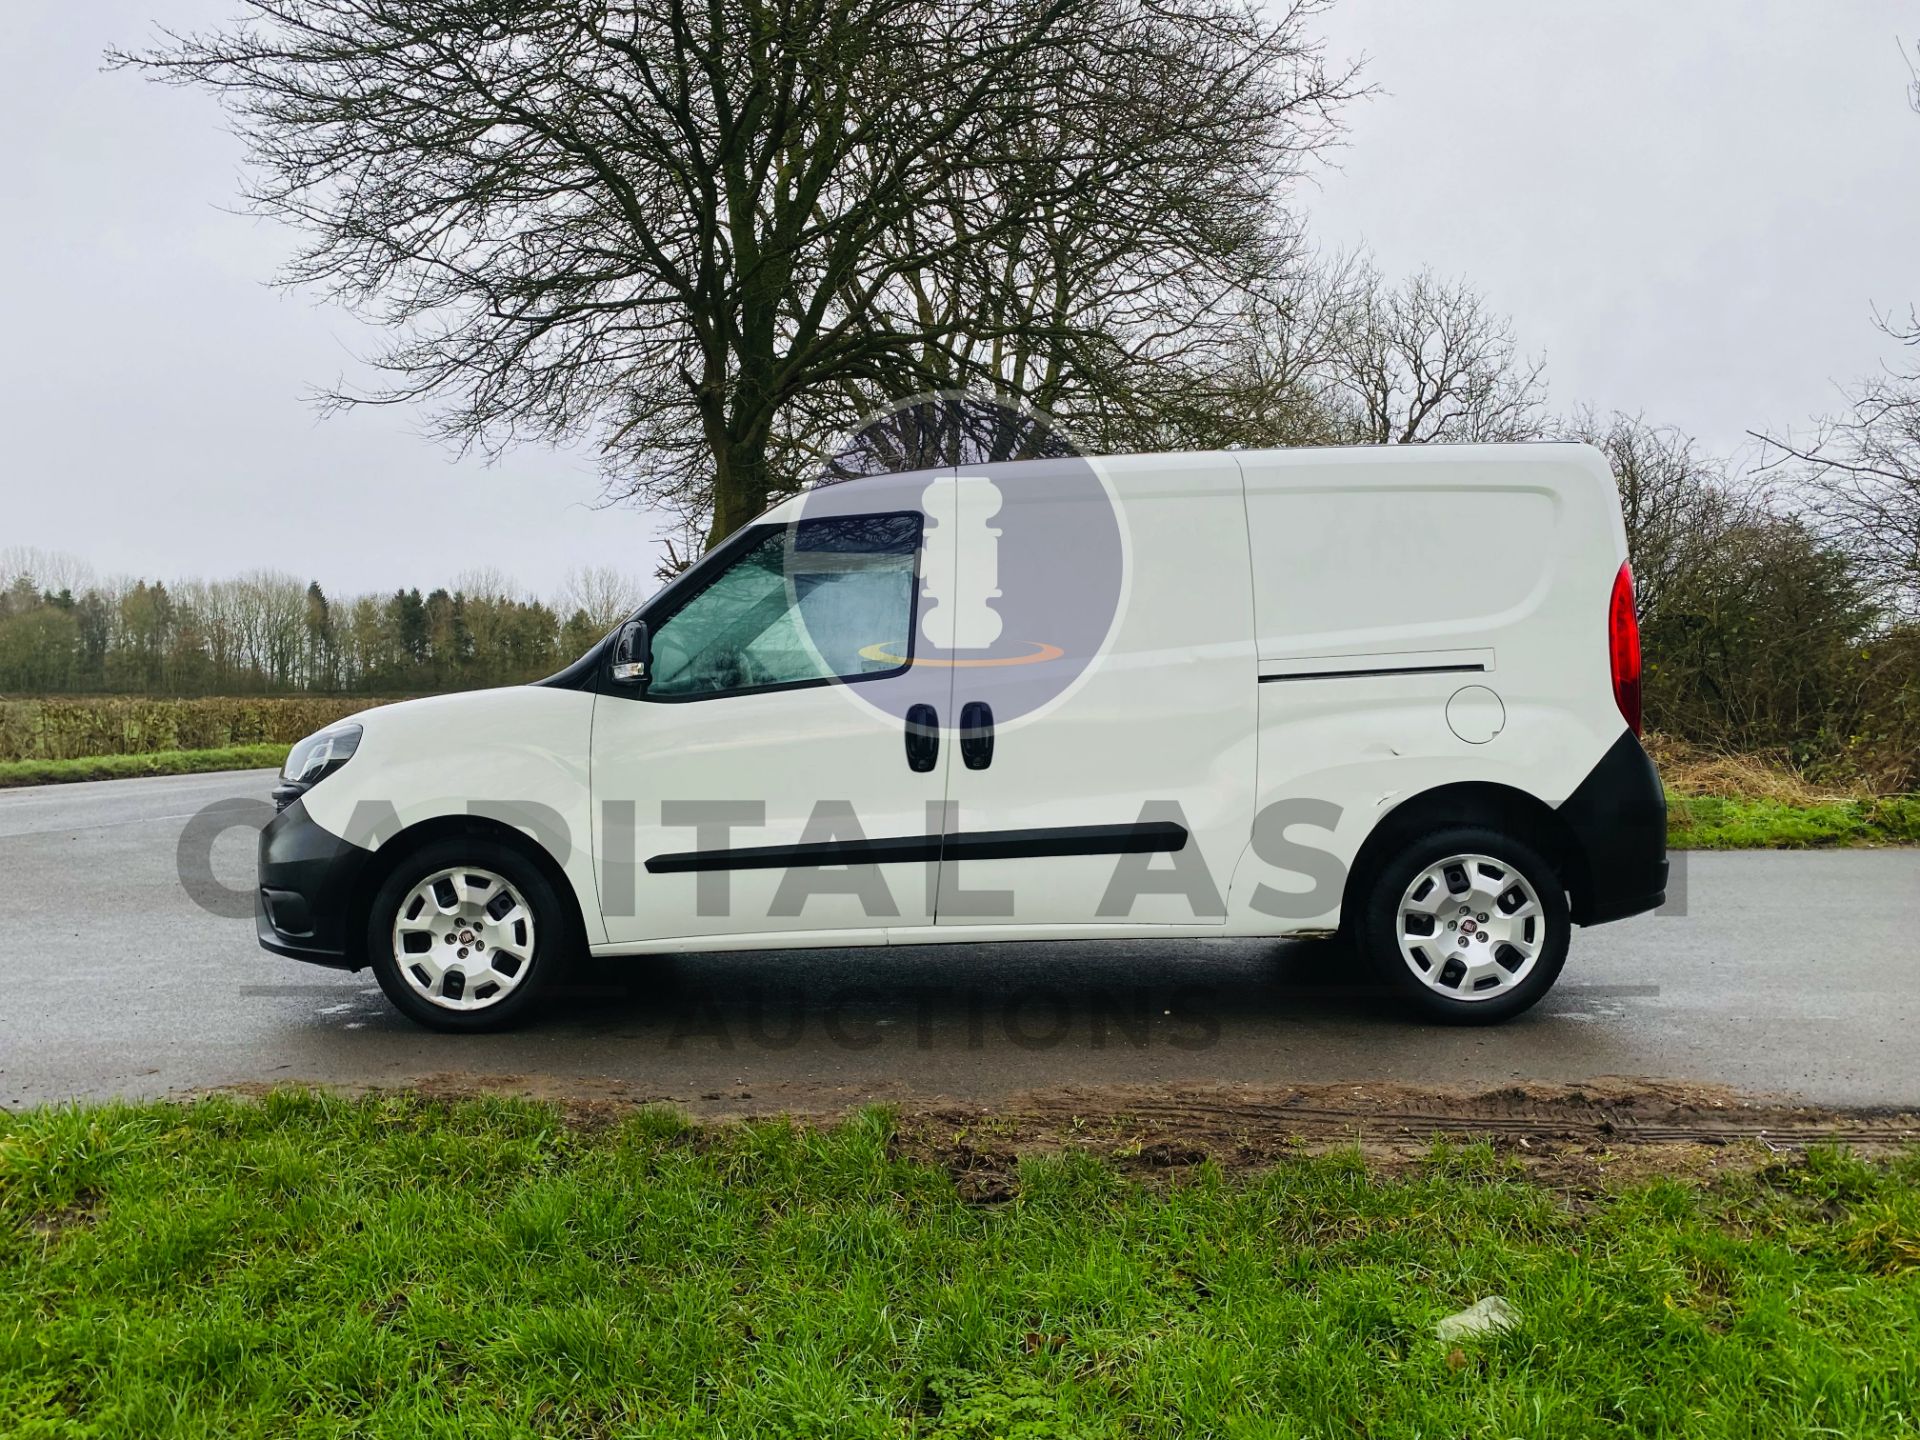 FIAT DOBLO 1.6 MULTIJET LWB "EURO 6" AIR CON - ONLY 46793 MILES! - 19 REG - (NEW SHAPE) - - Image 6 of 23